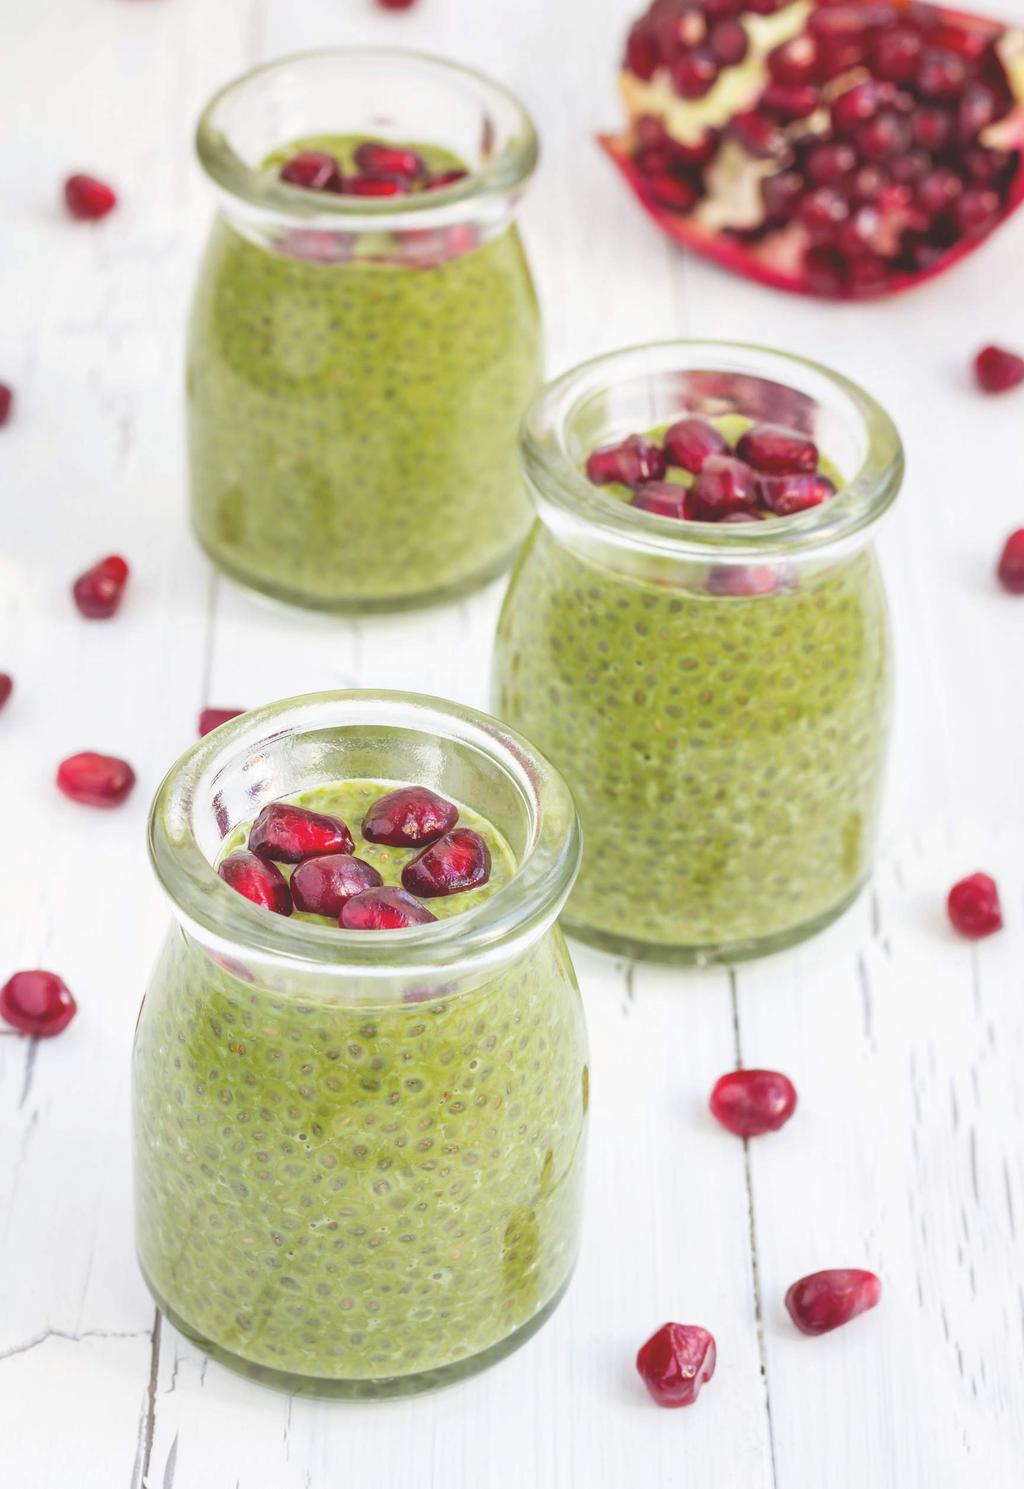 MATCHA CHIA PUDDING 20 MINS 1 HOUR 2 BOWLS - 2 cups of almond milk - 1 tsp of vanilla extract - 1-2 cups of mixed berries - 6 tbsp of slendertoxtea chia seeds - 1 tsp of slendertoxtea ceremonial